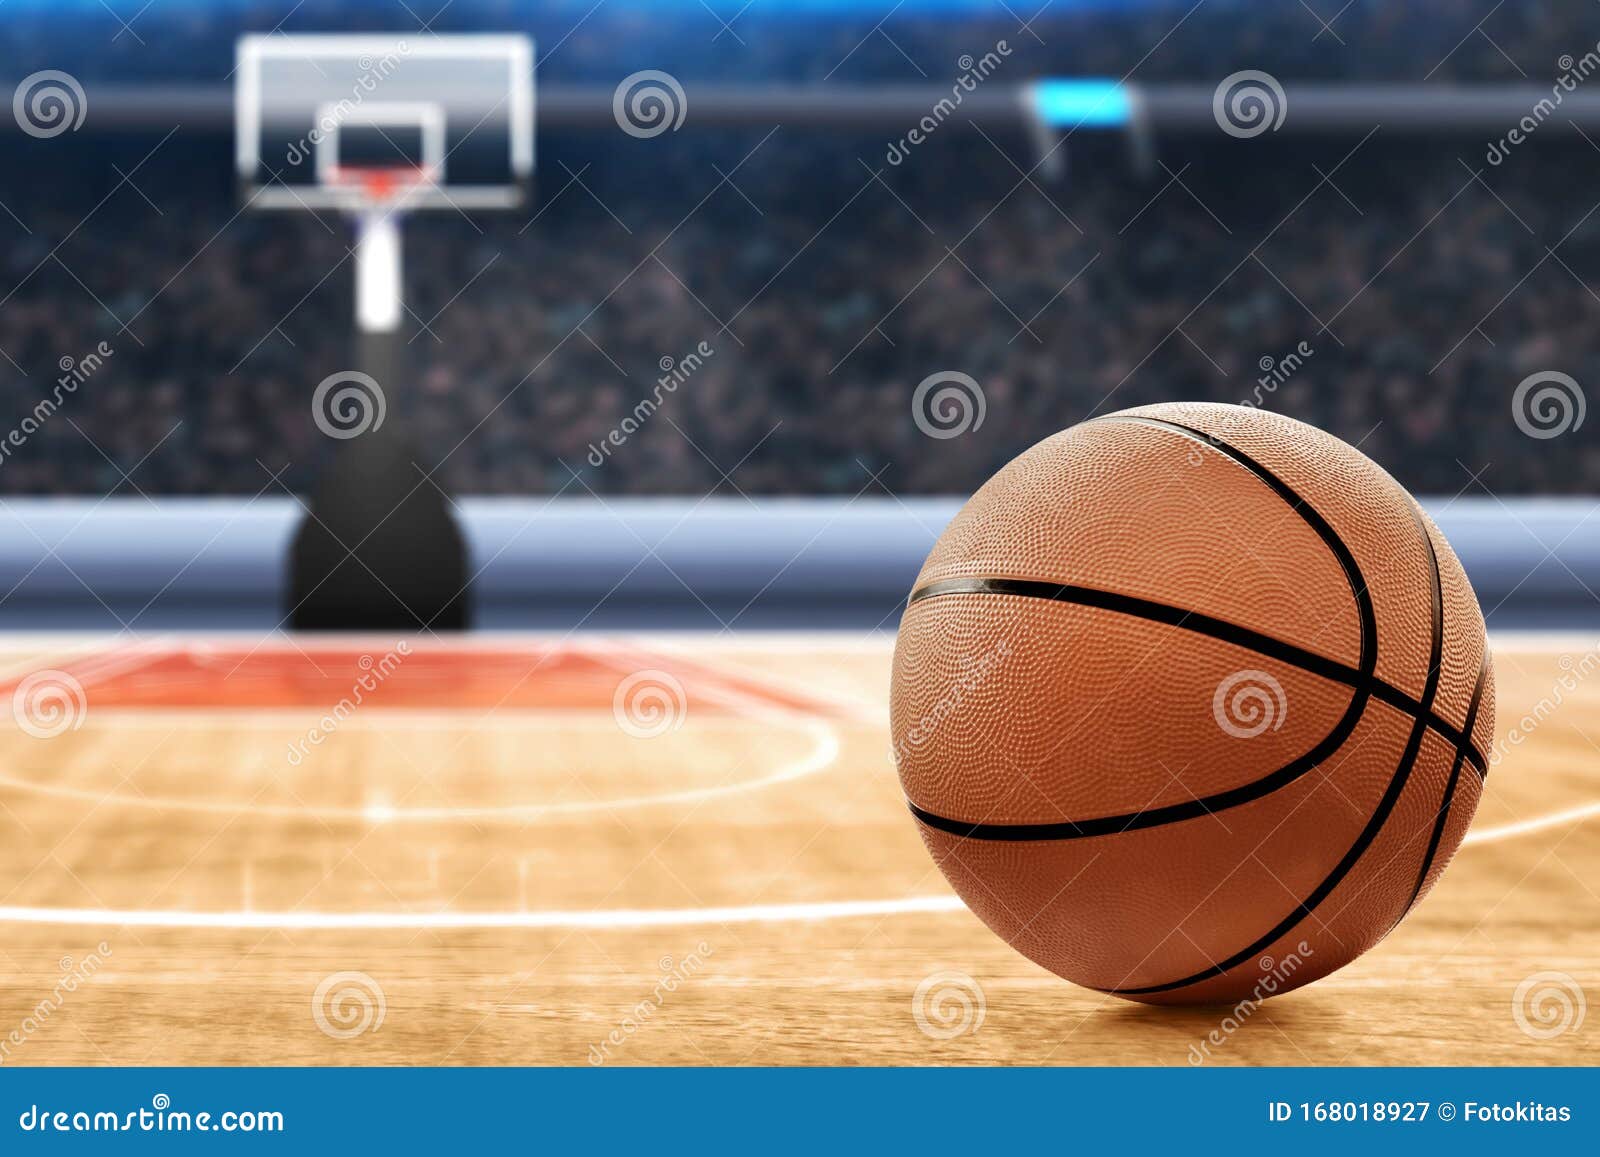 How to Design A Basketball Court - OnCourt Online